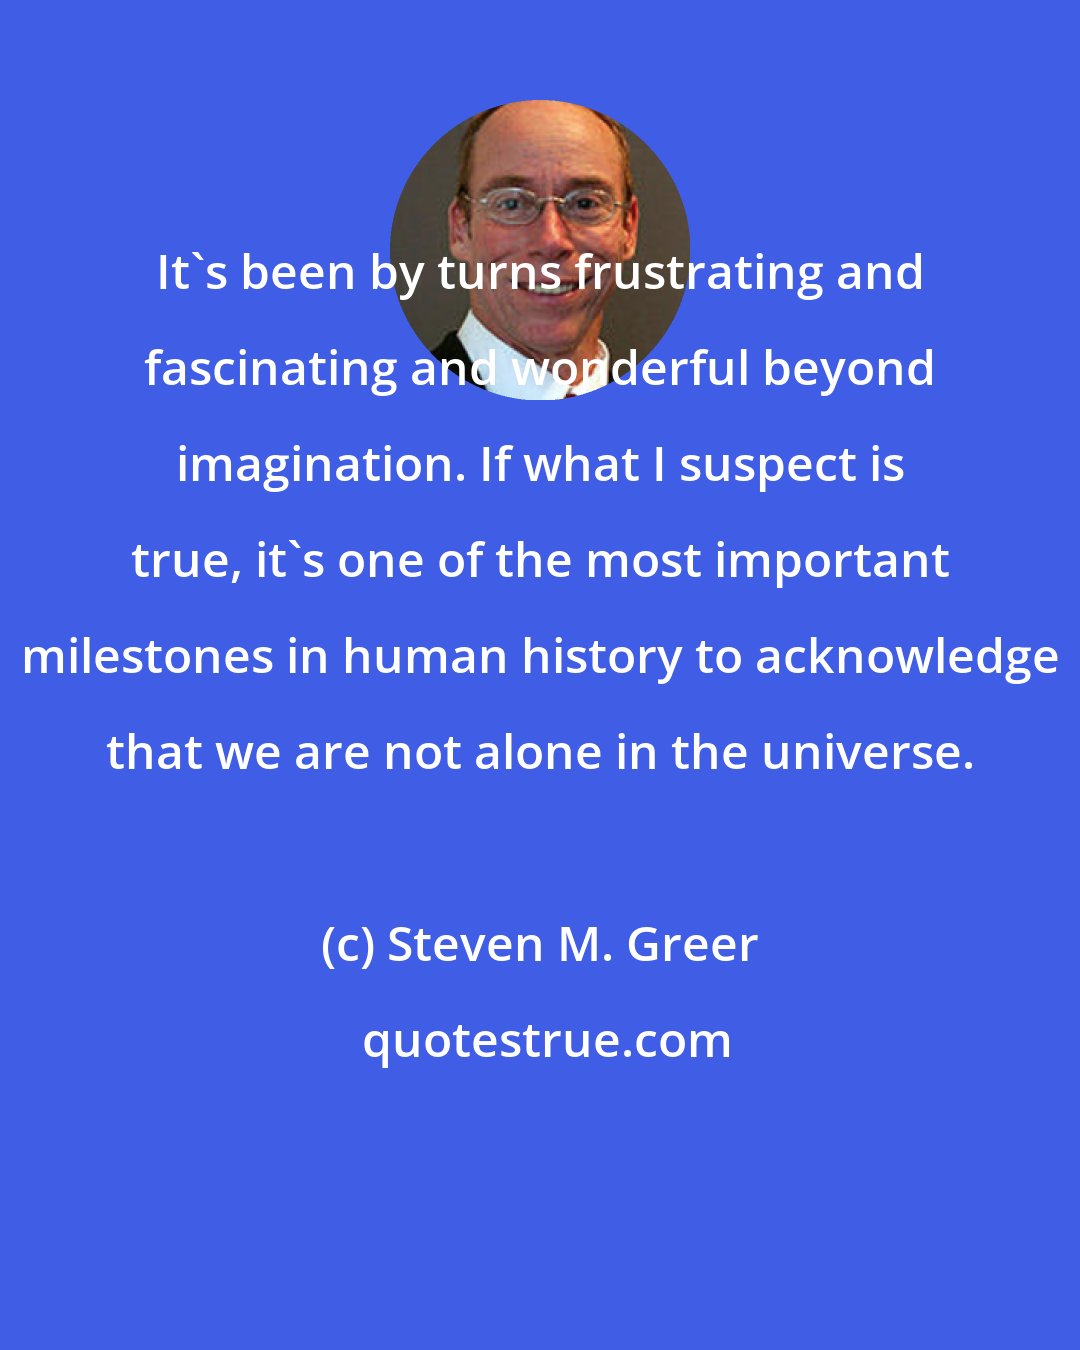 Steven M. Greer: It's been by turns frustrating and fascinating and wonderful beyond imagination. If what I suspect is true, it's one of the most important milestones in human history to acknowledge that we are not alone in the universe.